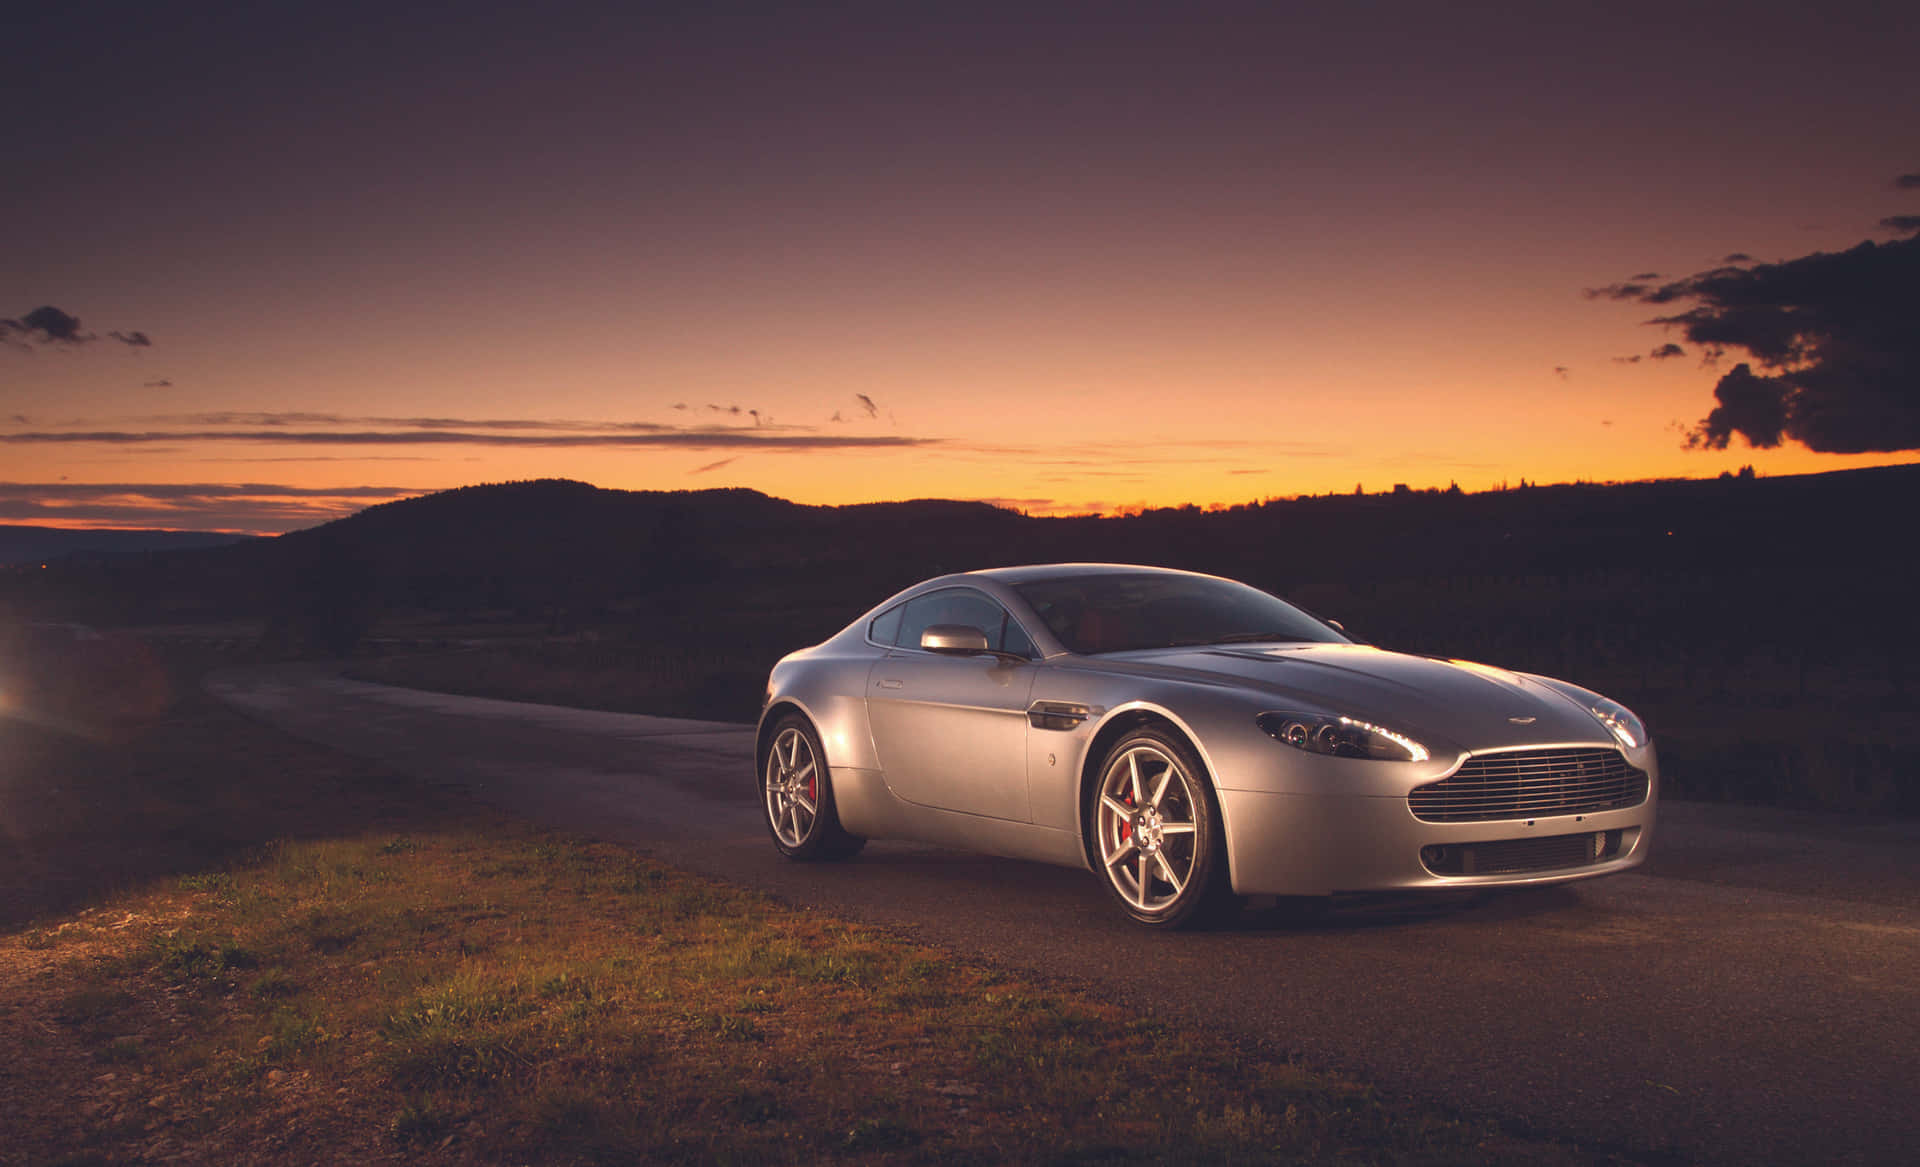 The Aston Martin Vantage - A blend of luxury and performance Wallpaper